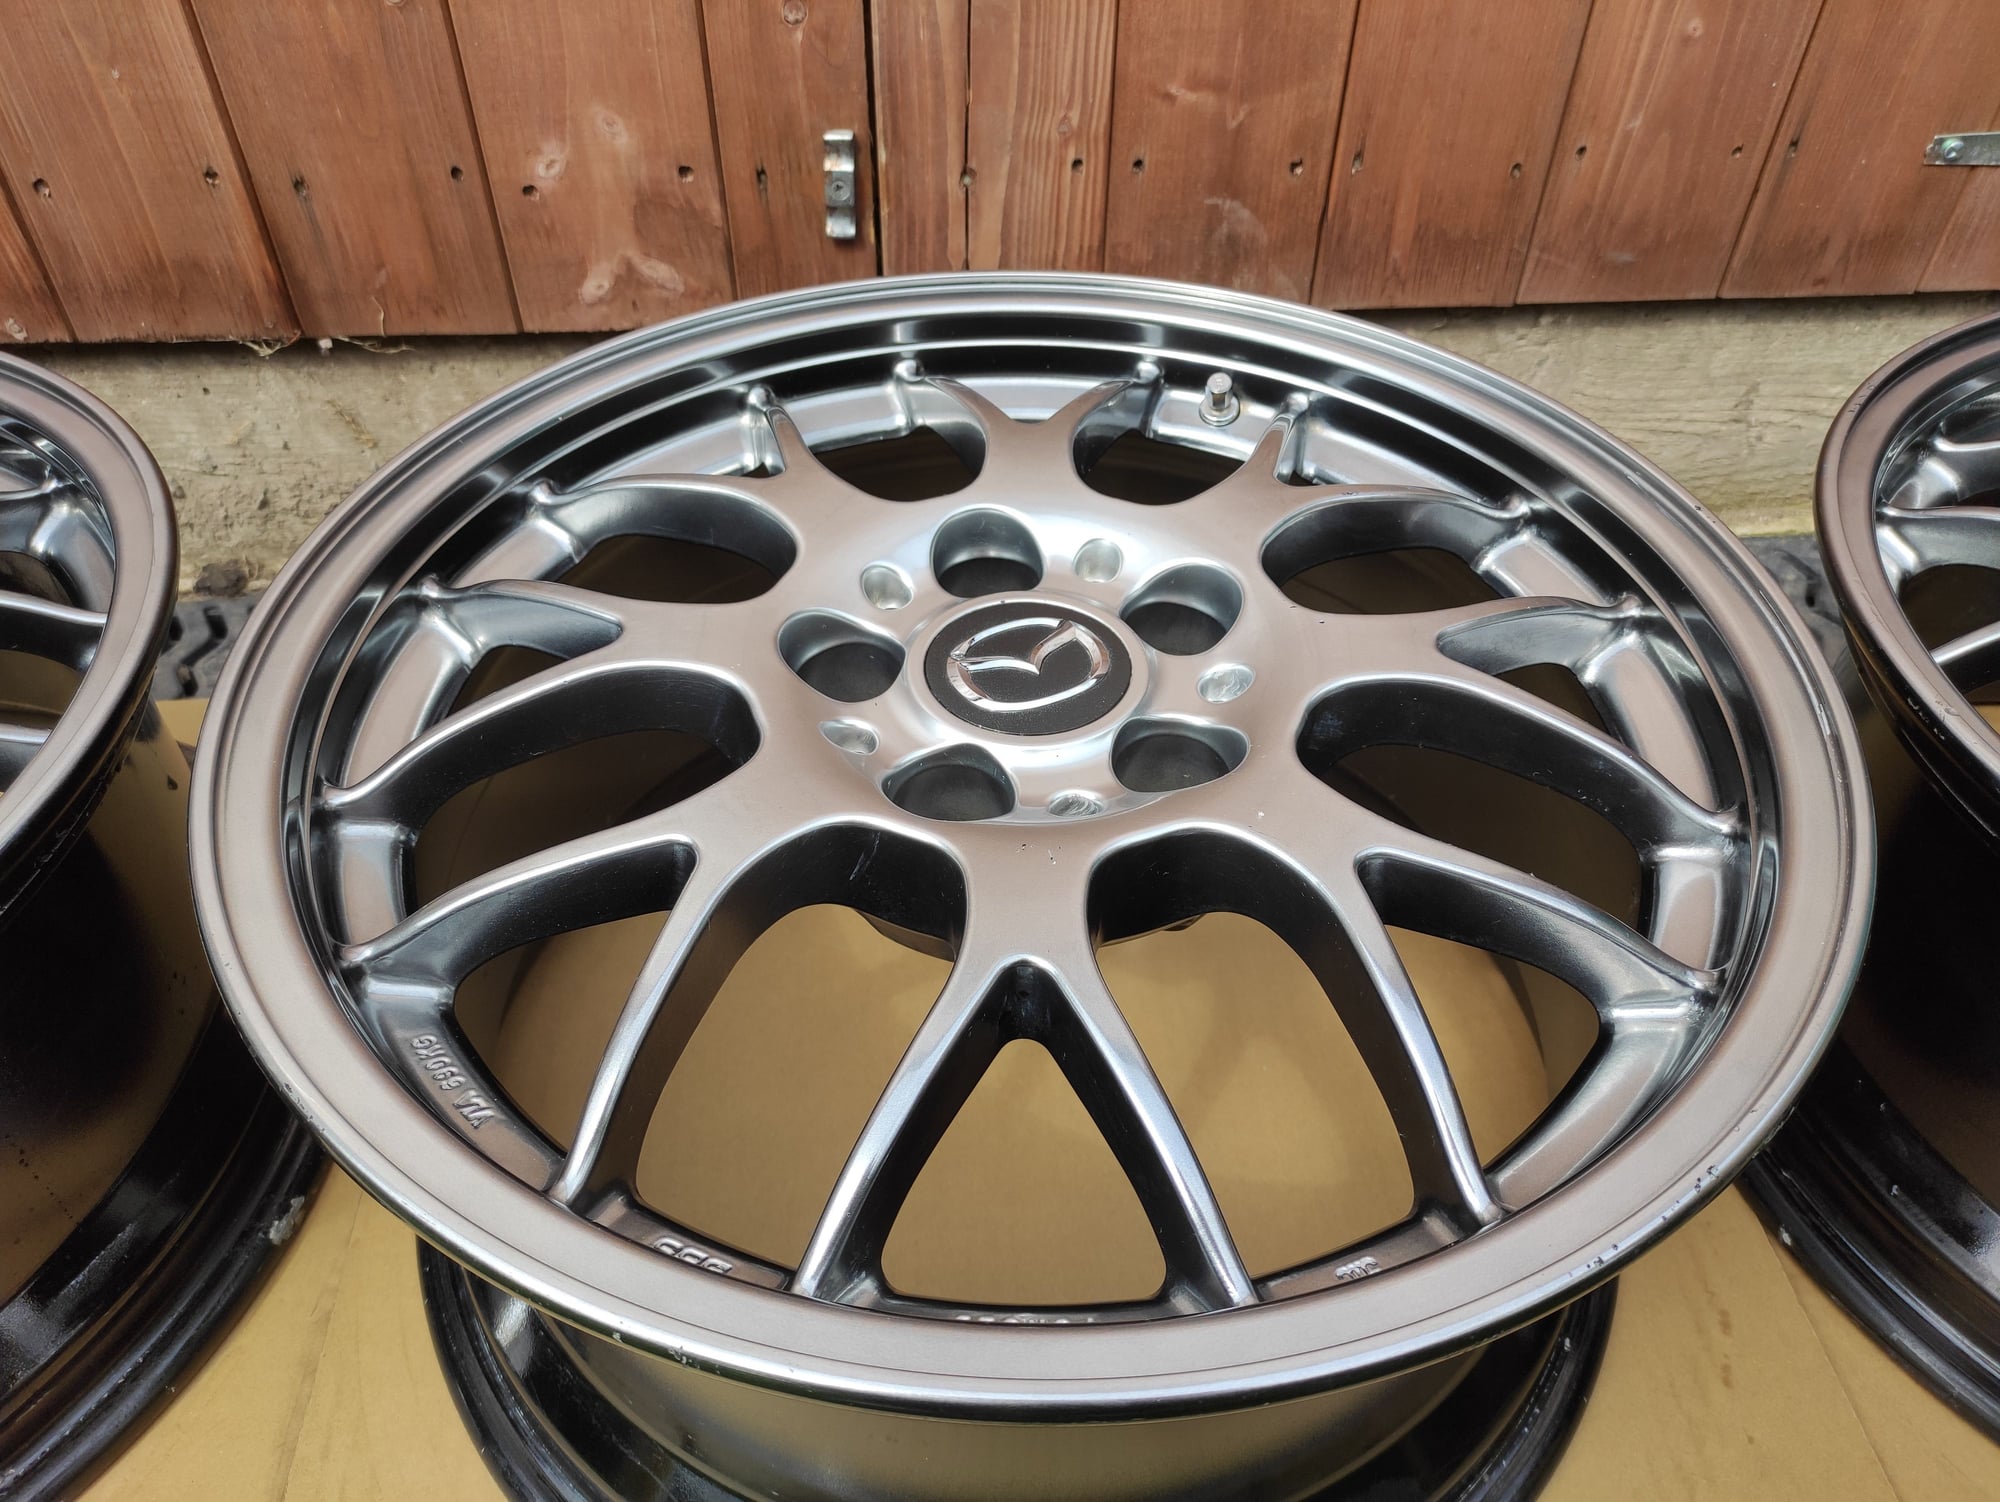 Wheels and Tires/Axles - Genuine Spirit R Type A Wheels - Used - 1992 to 2002 Mazda RX-7 - Banwell BS296D, United Kingdom